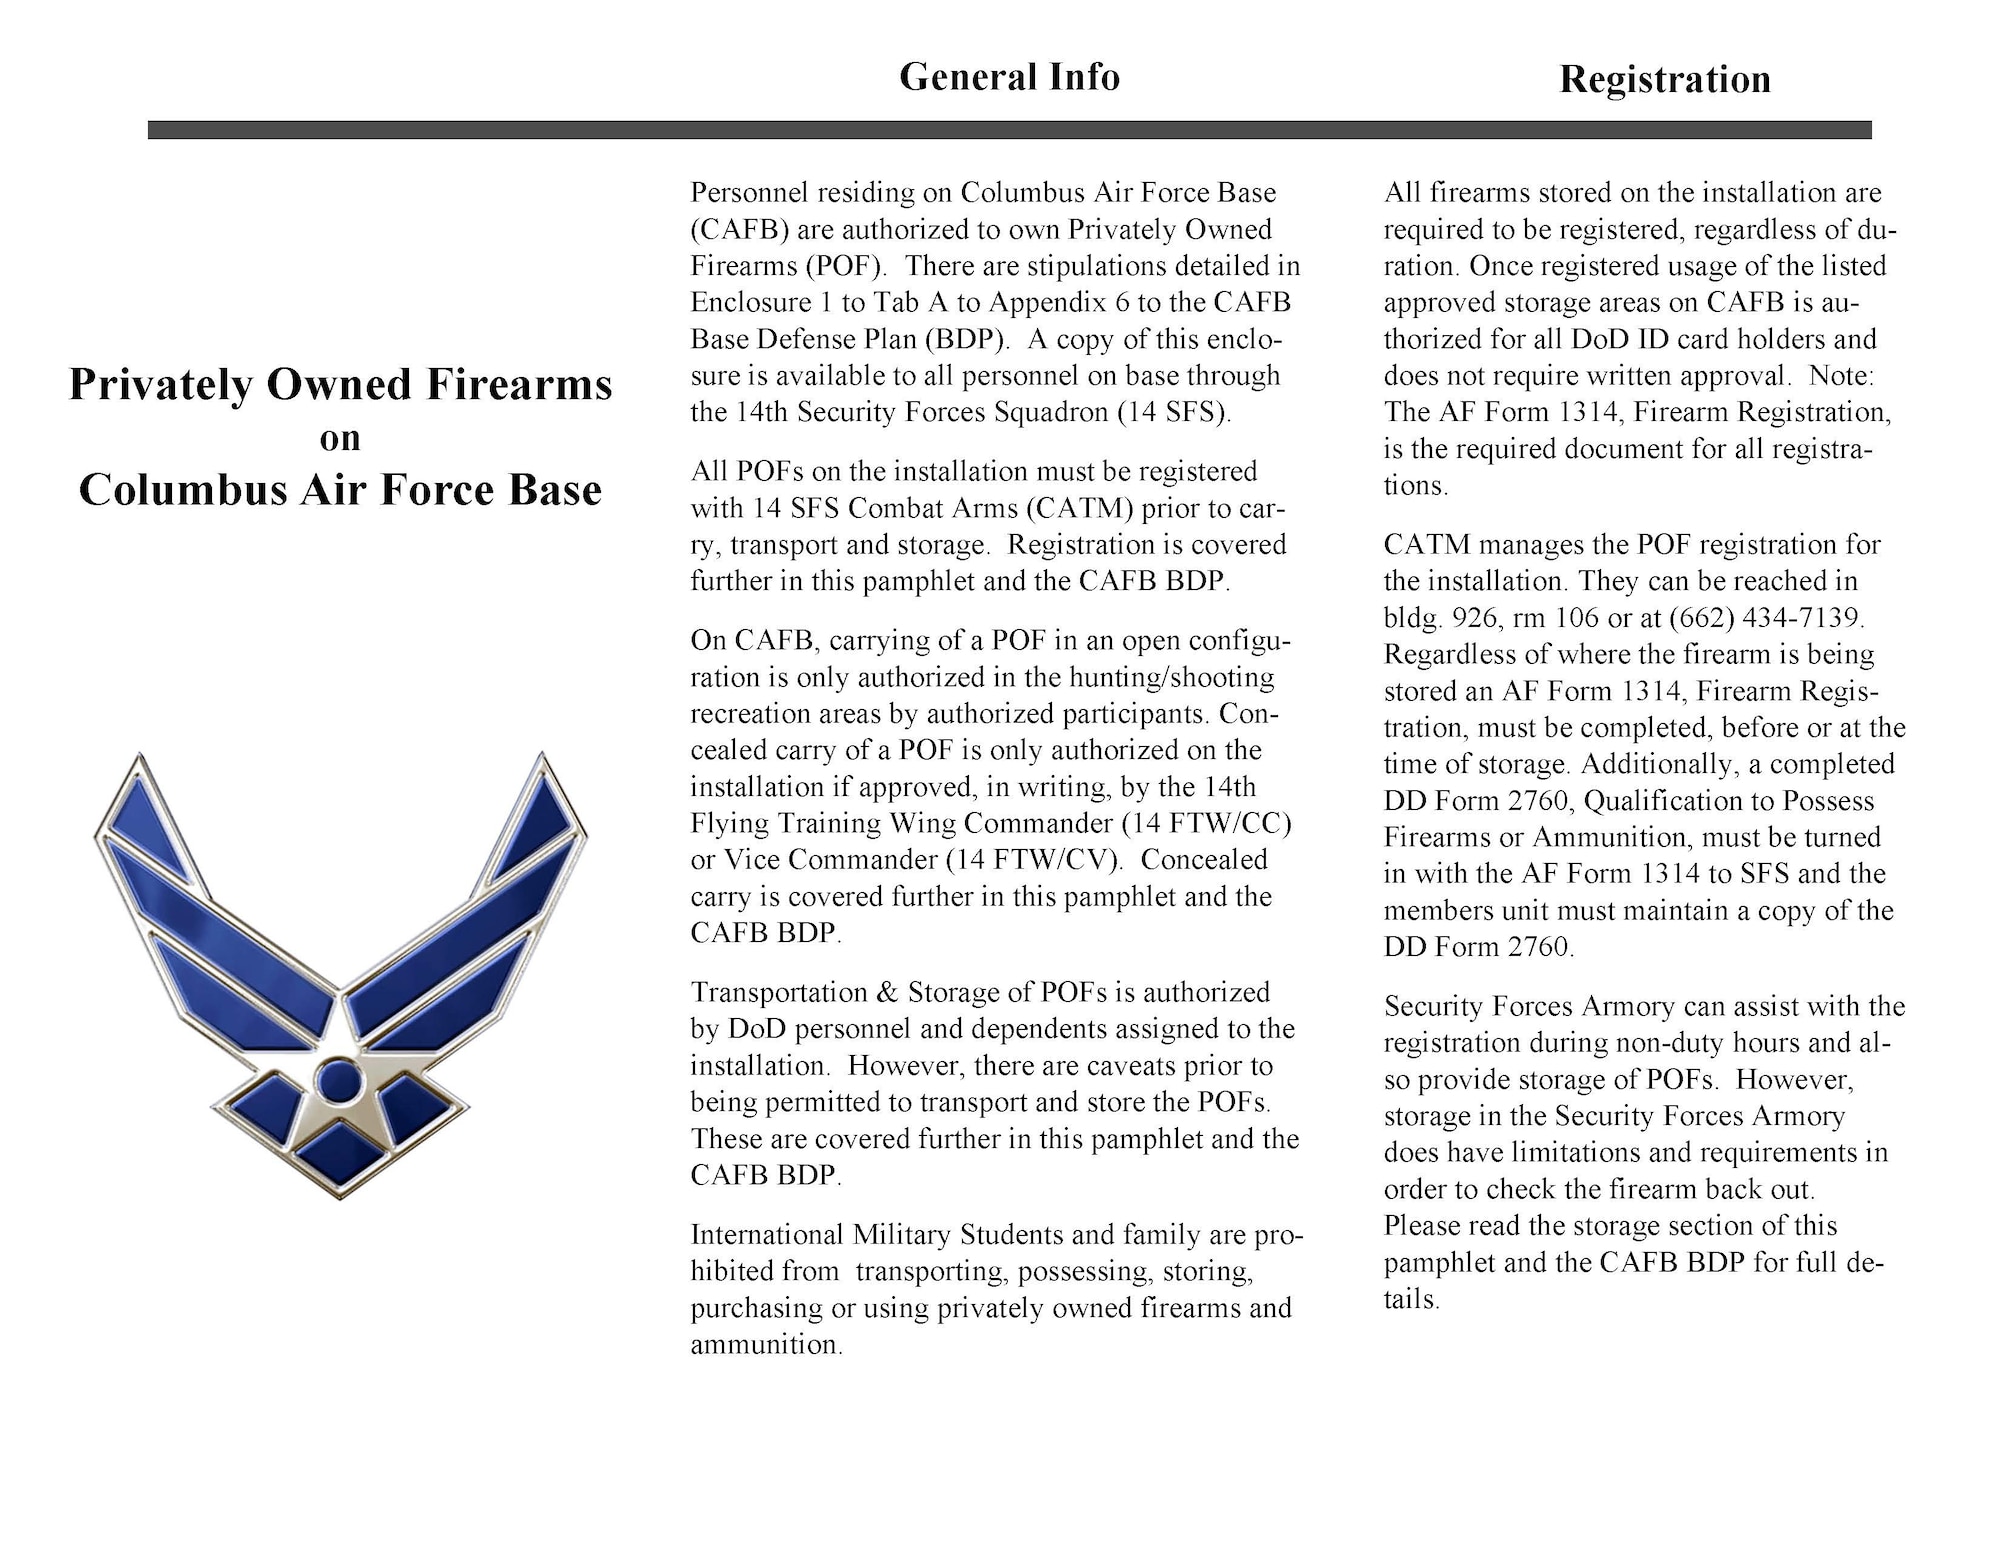 Privately Owned Firearms guidance for Columbus Air Force Base residents.